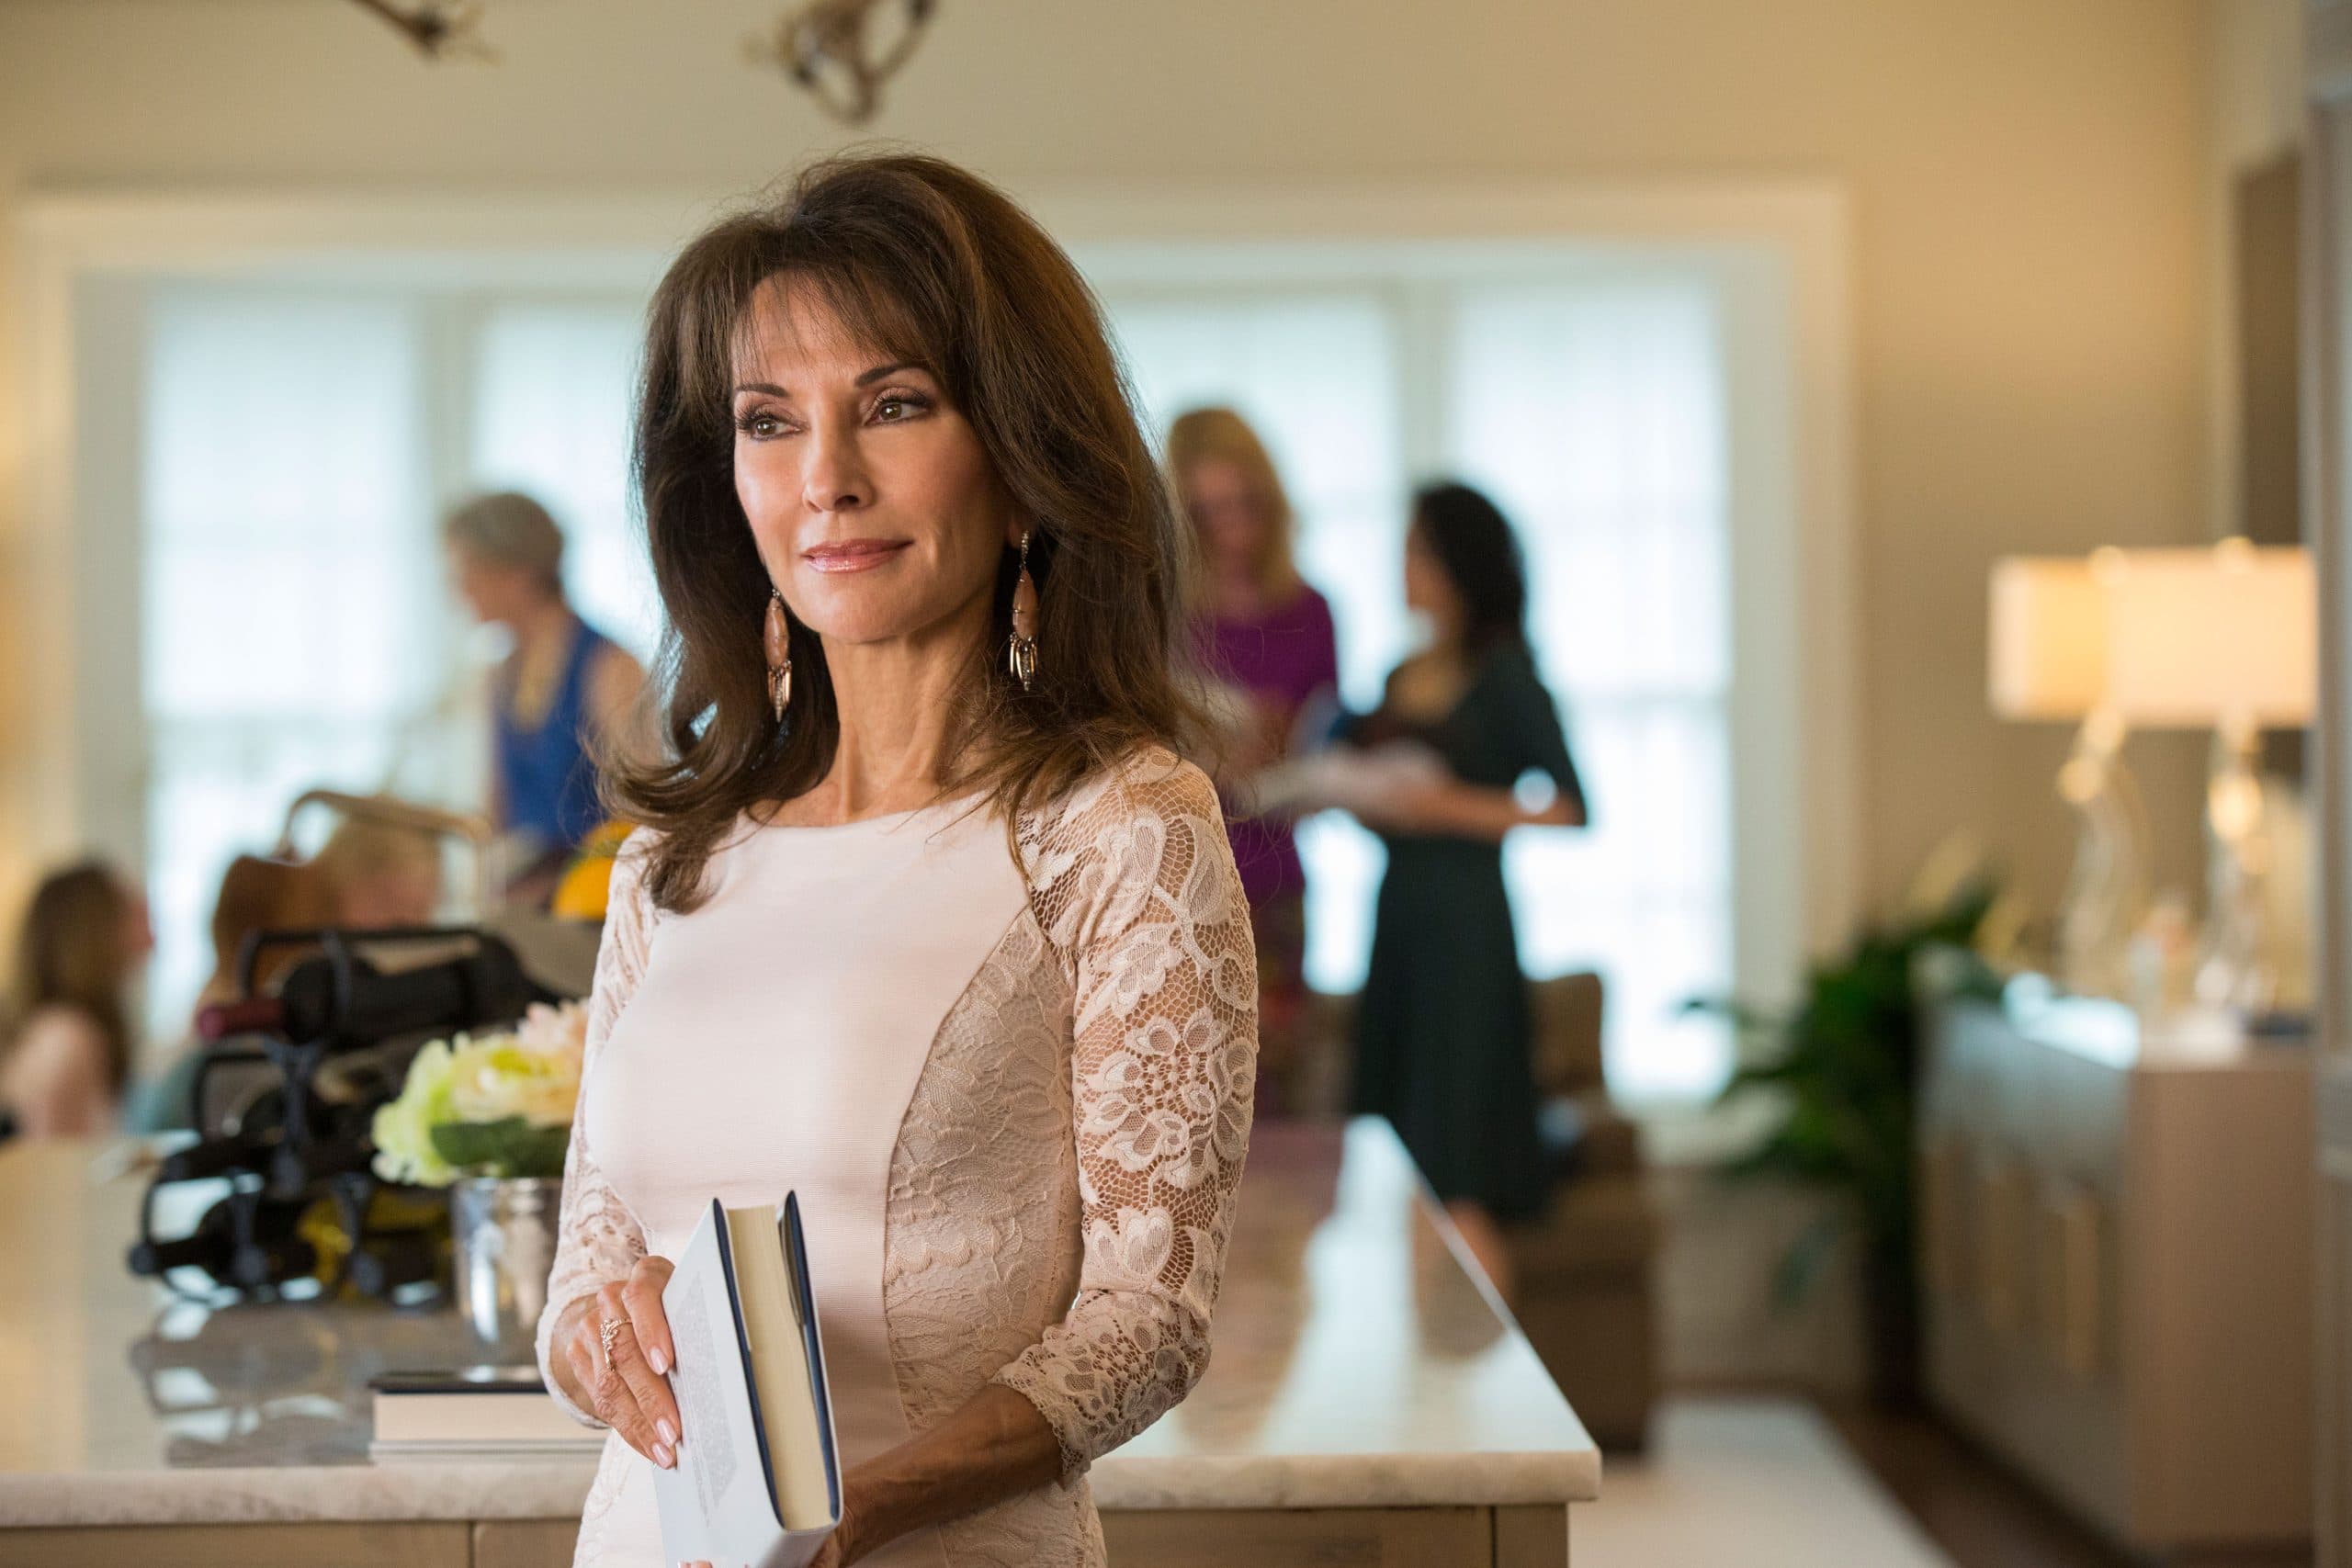 DEVIOUS MAIDS, Susan Lucci in 'Since You Went Away' (Season 3, Episode 4, aired June 22, 2015)